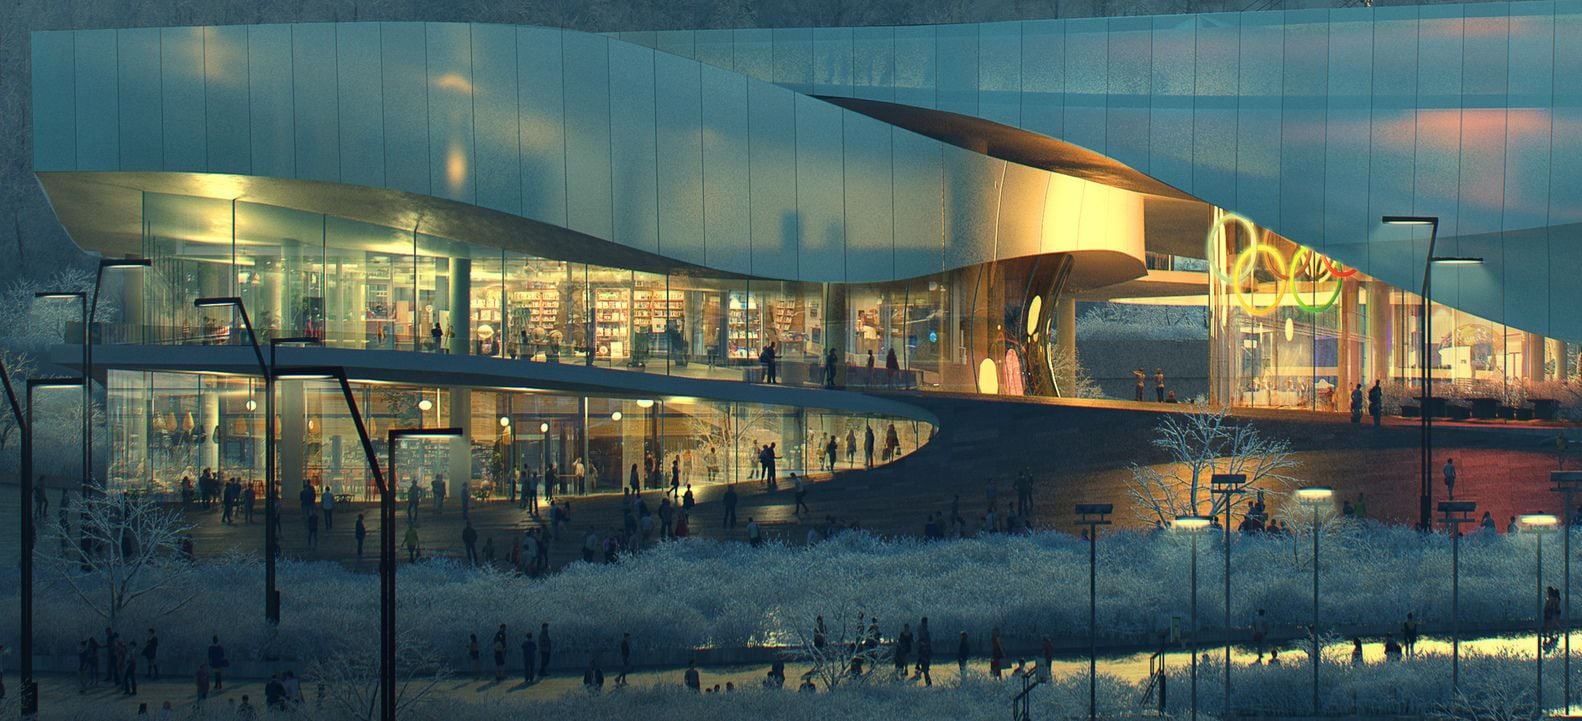 Beijing's new Winter Olympic Museum will feature a fully functional ski slope.